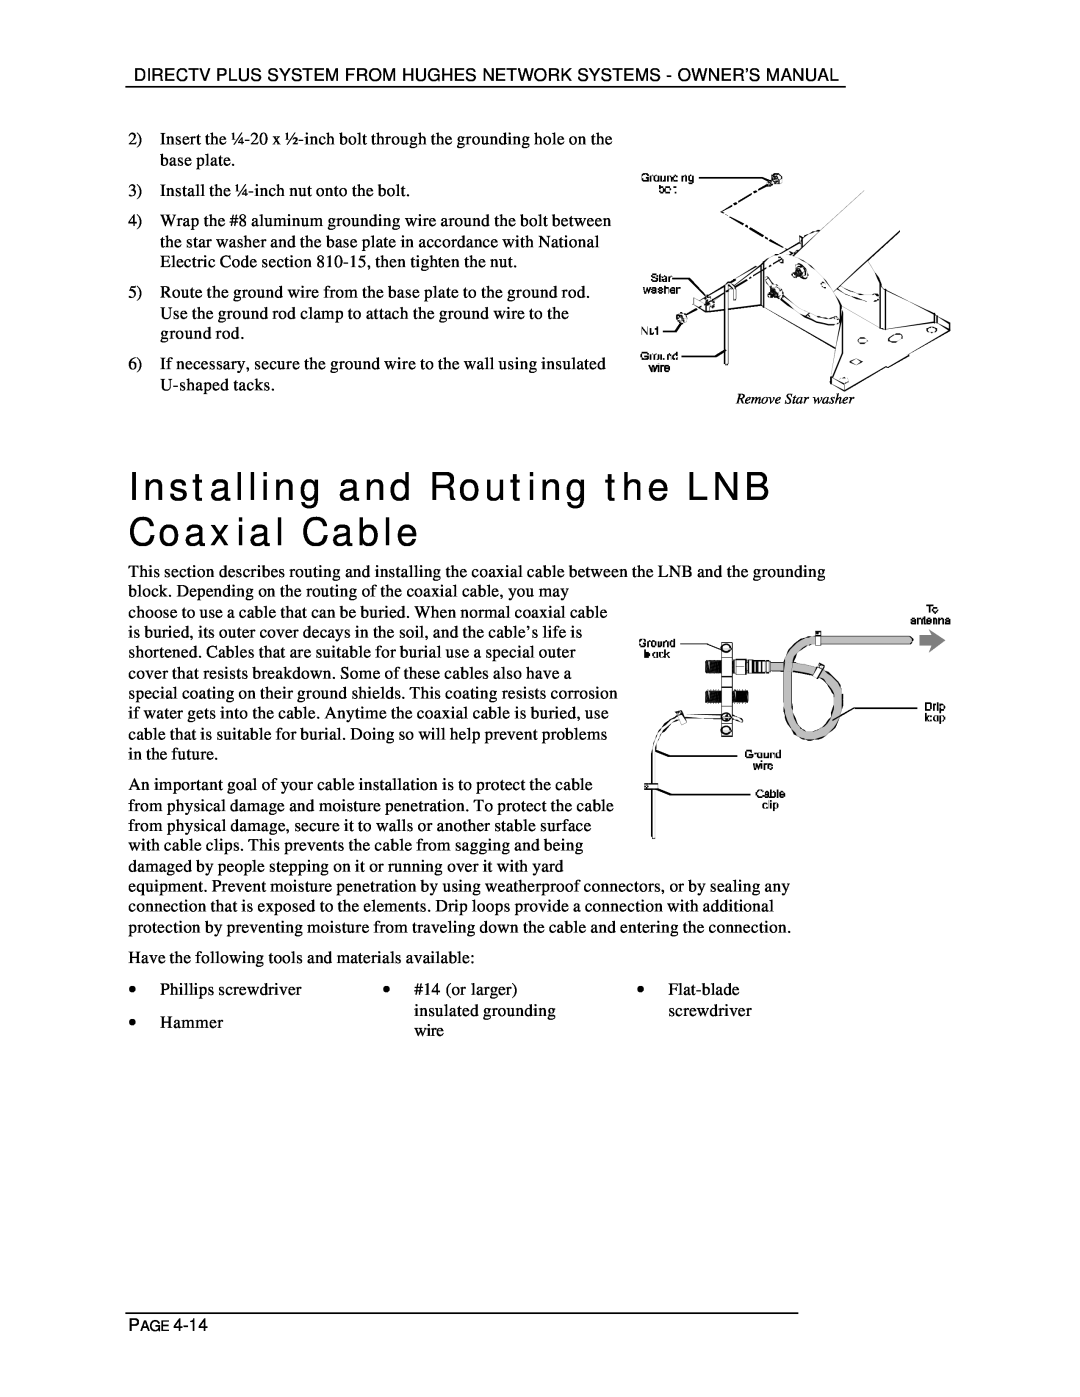 DirecTV HIRD-E25, HIRD-E11 owner manual Installing and Routing the LNB Coaxial Cable 